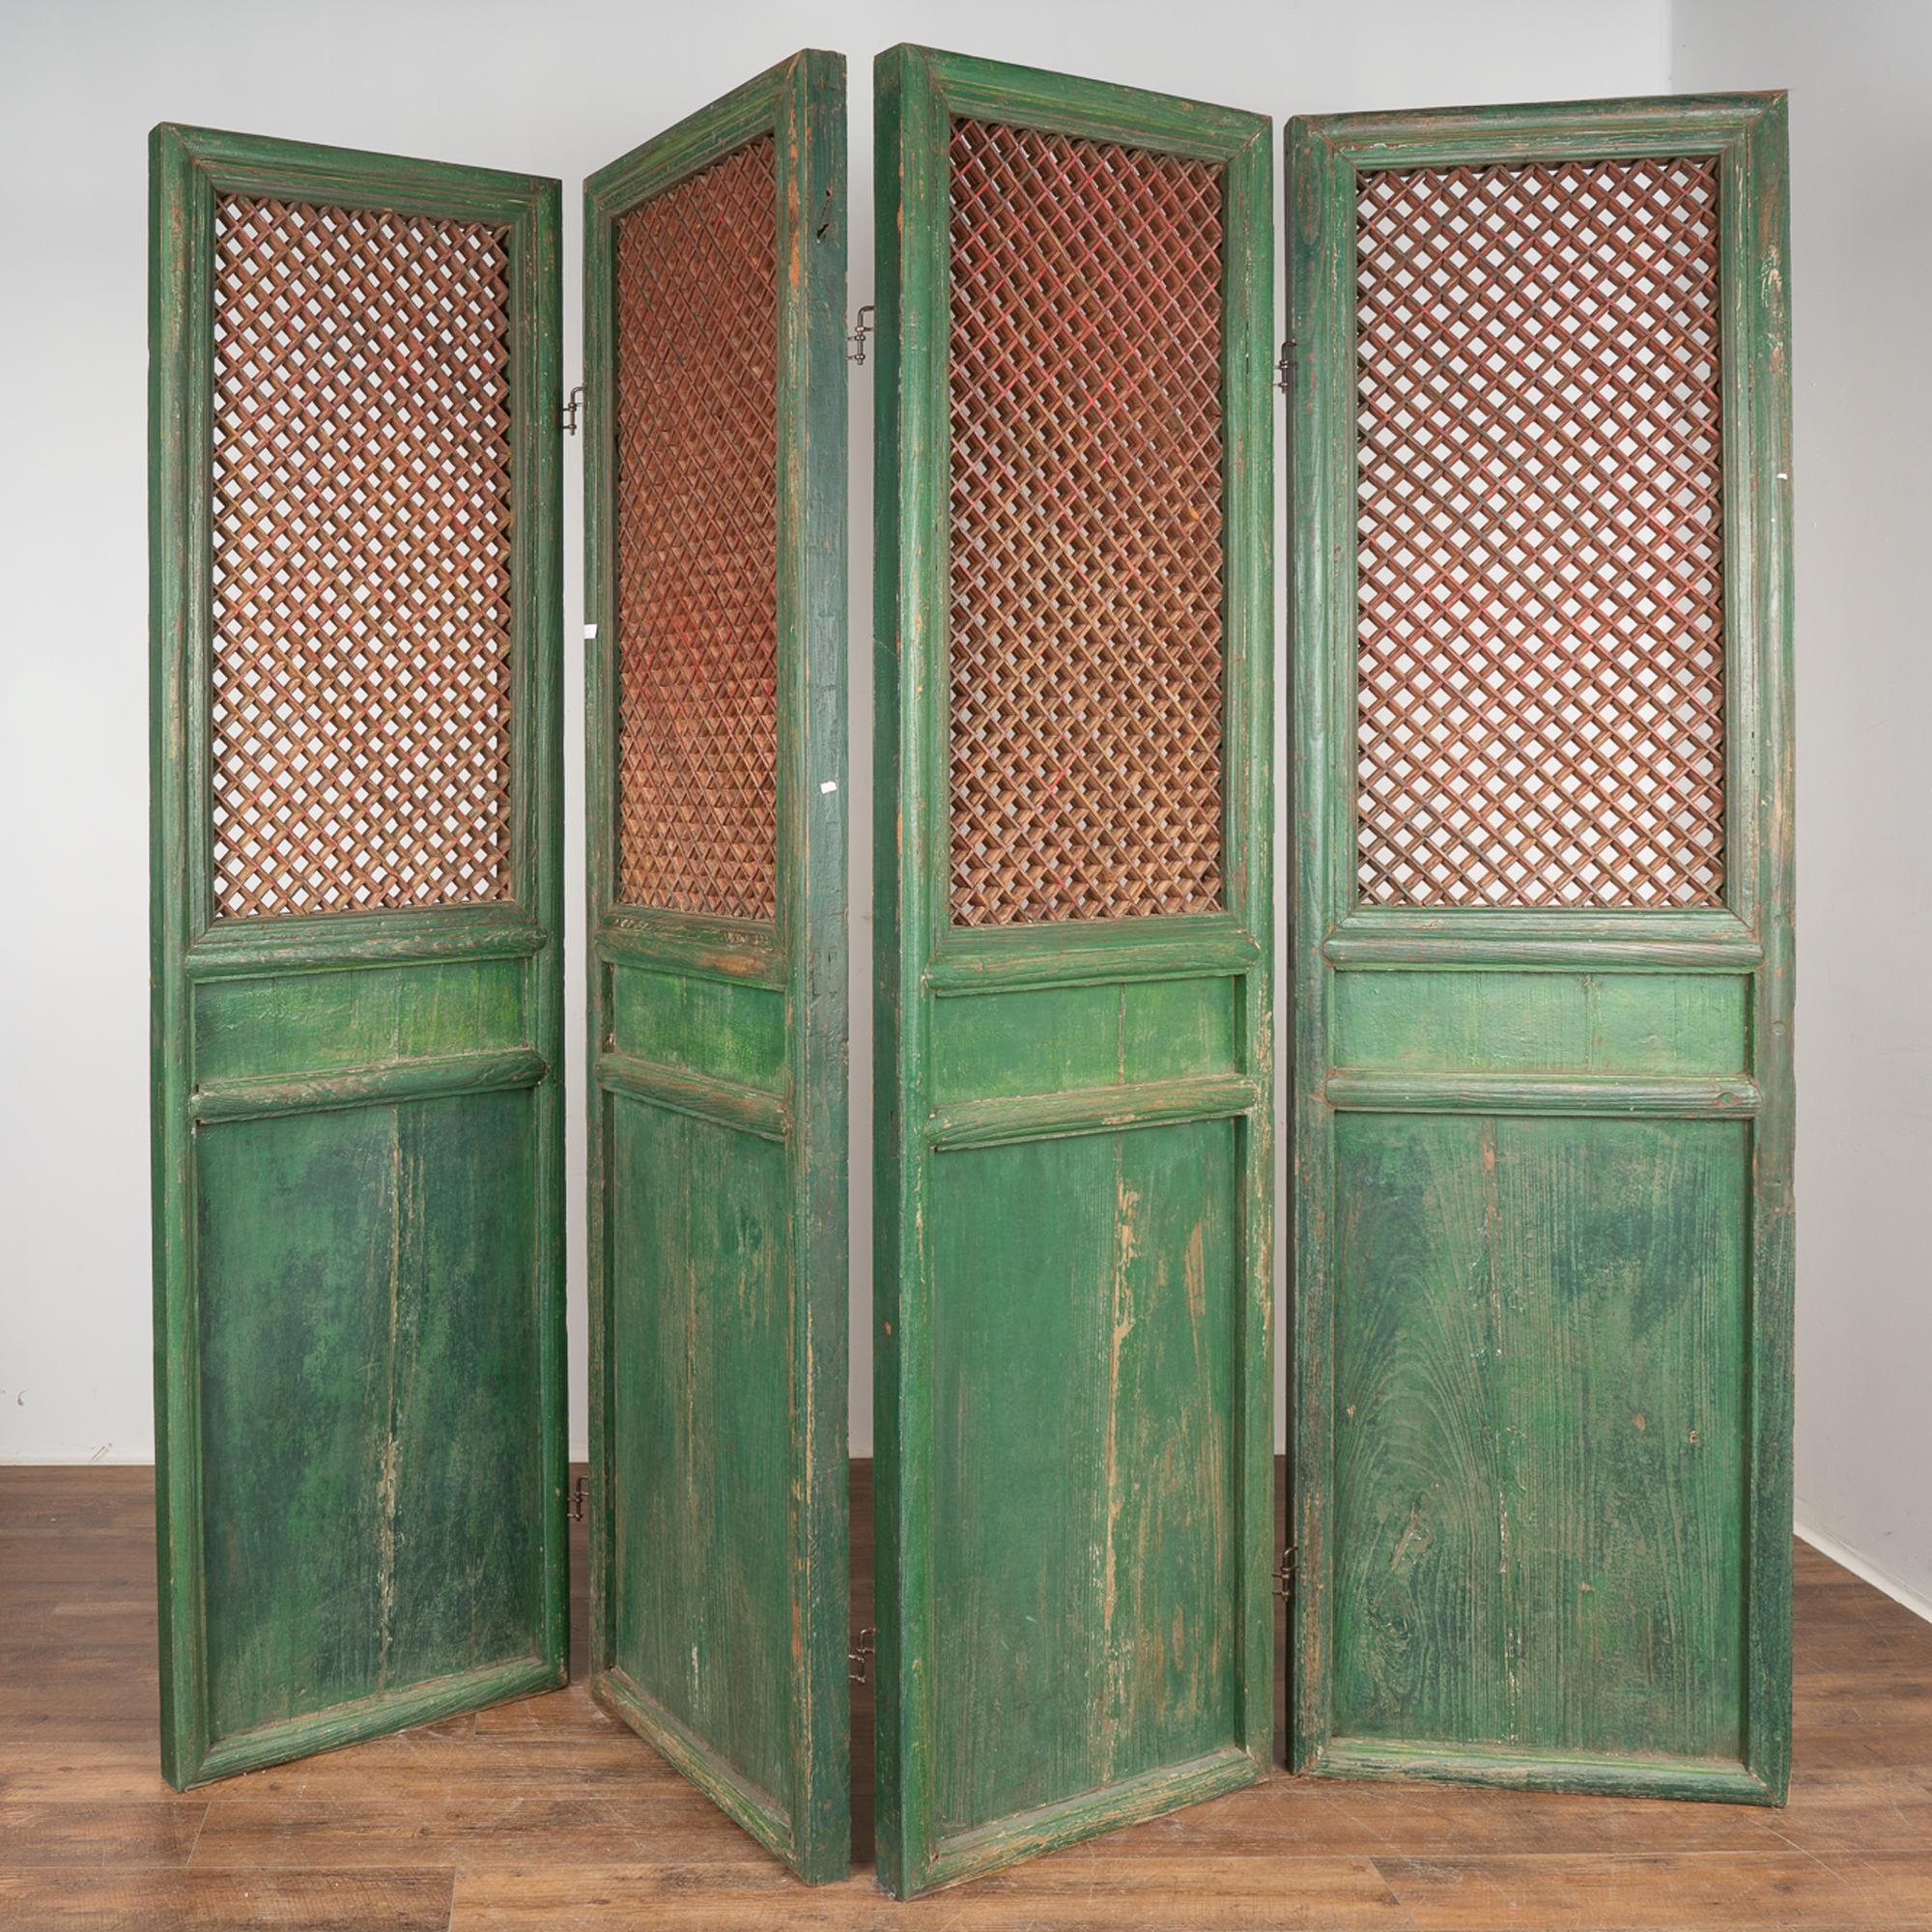 Chinese Export Green Painted Chinese Folding Screen Room Divider, circa 1840-60 For Sale